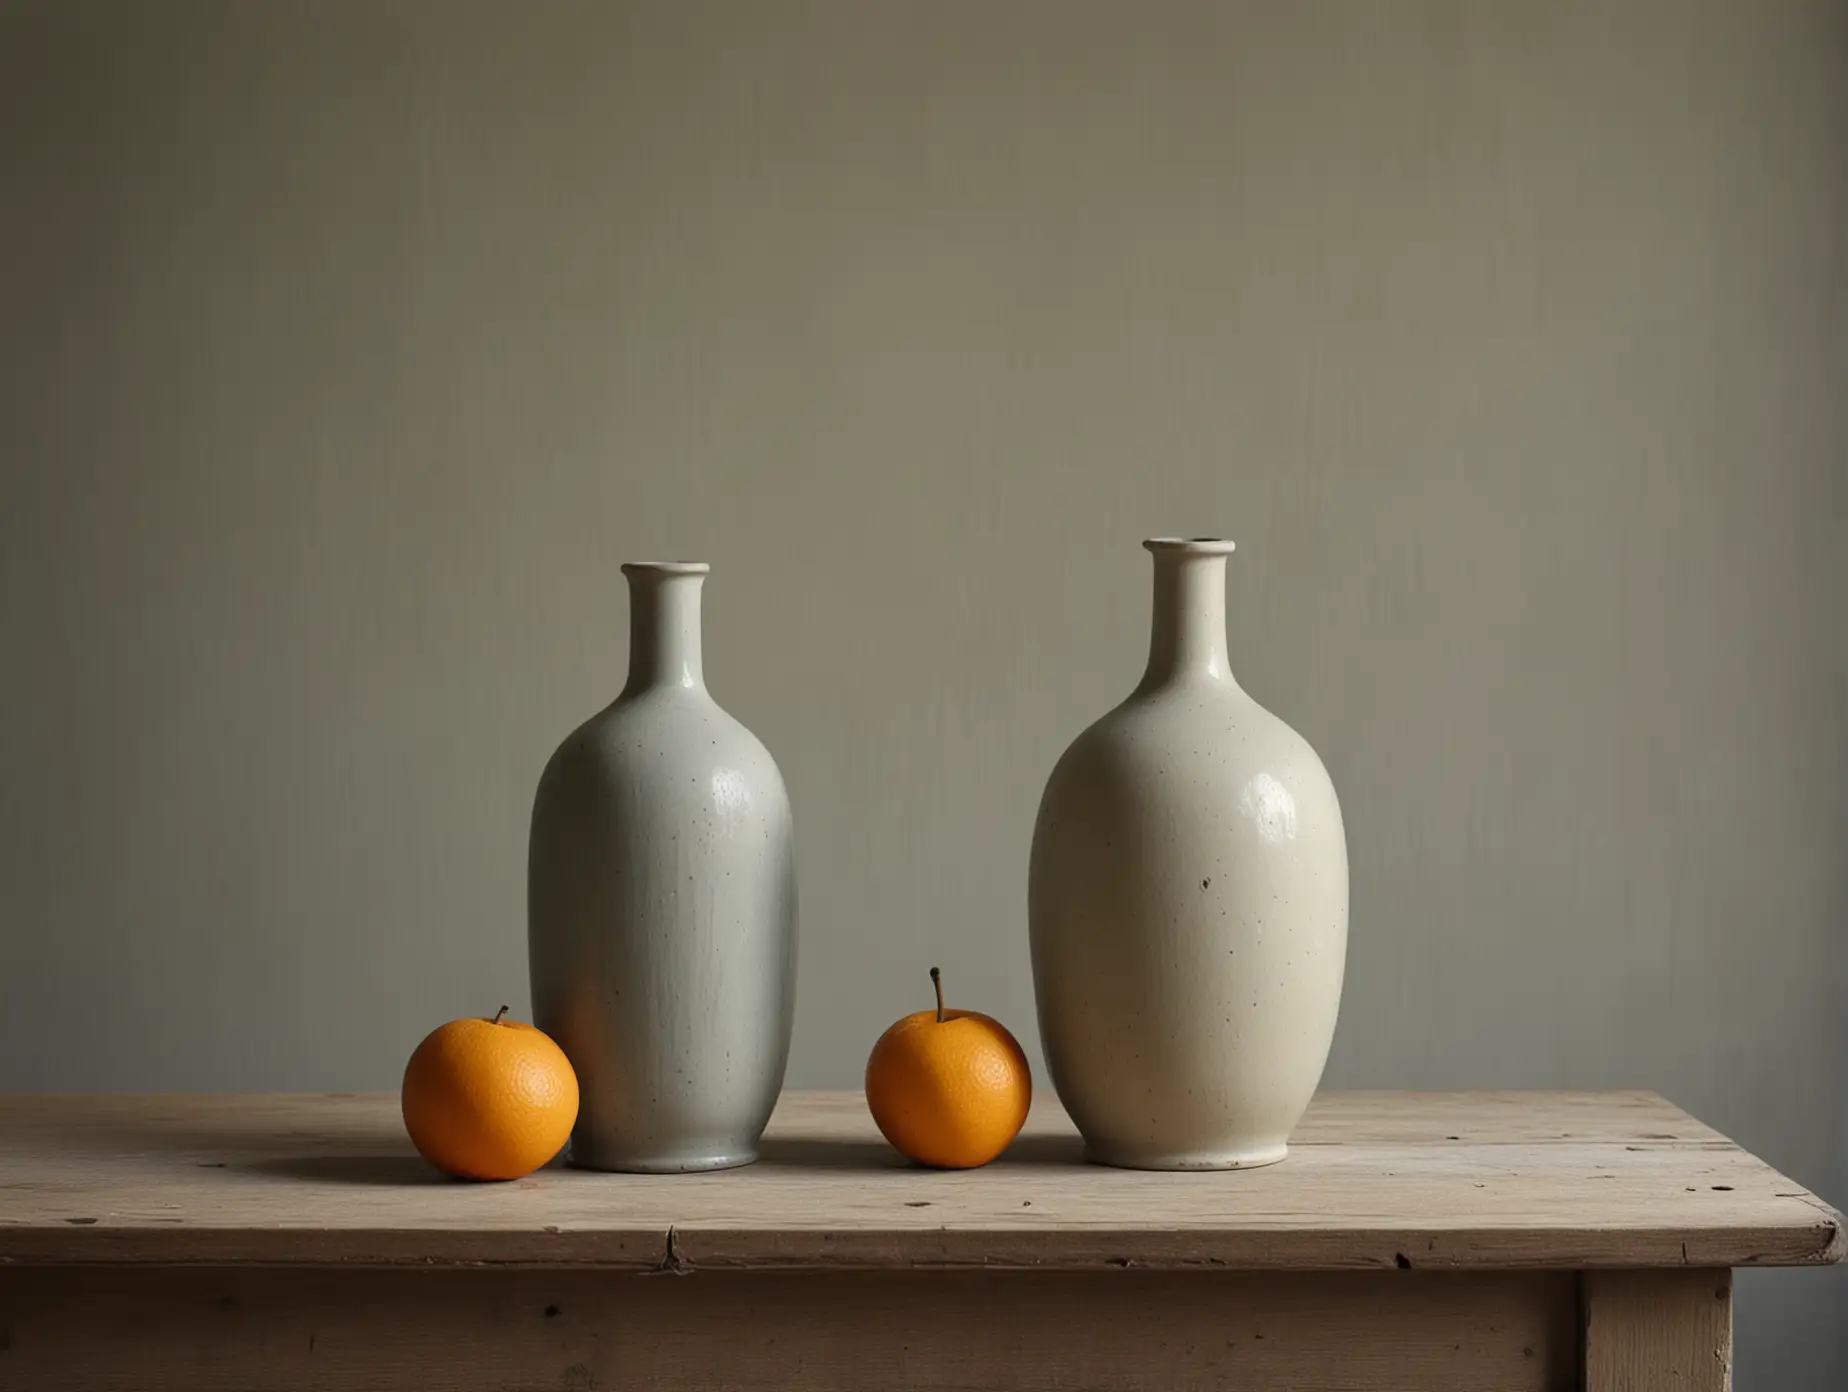 Minimalistic Still Life Photography in Low Saturation Morandi Inspired Composition